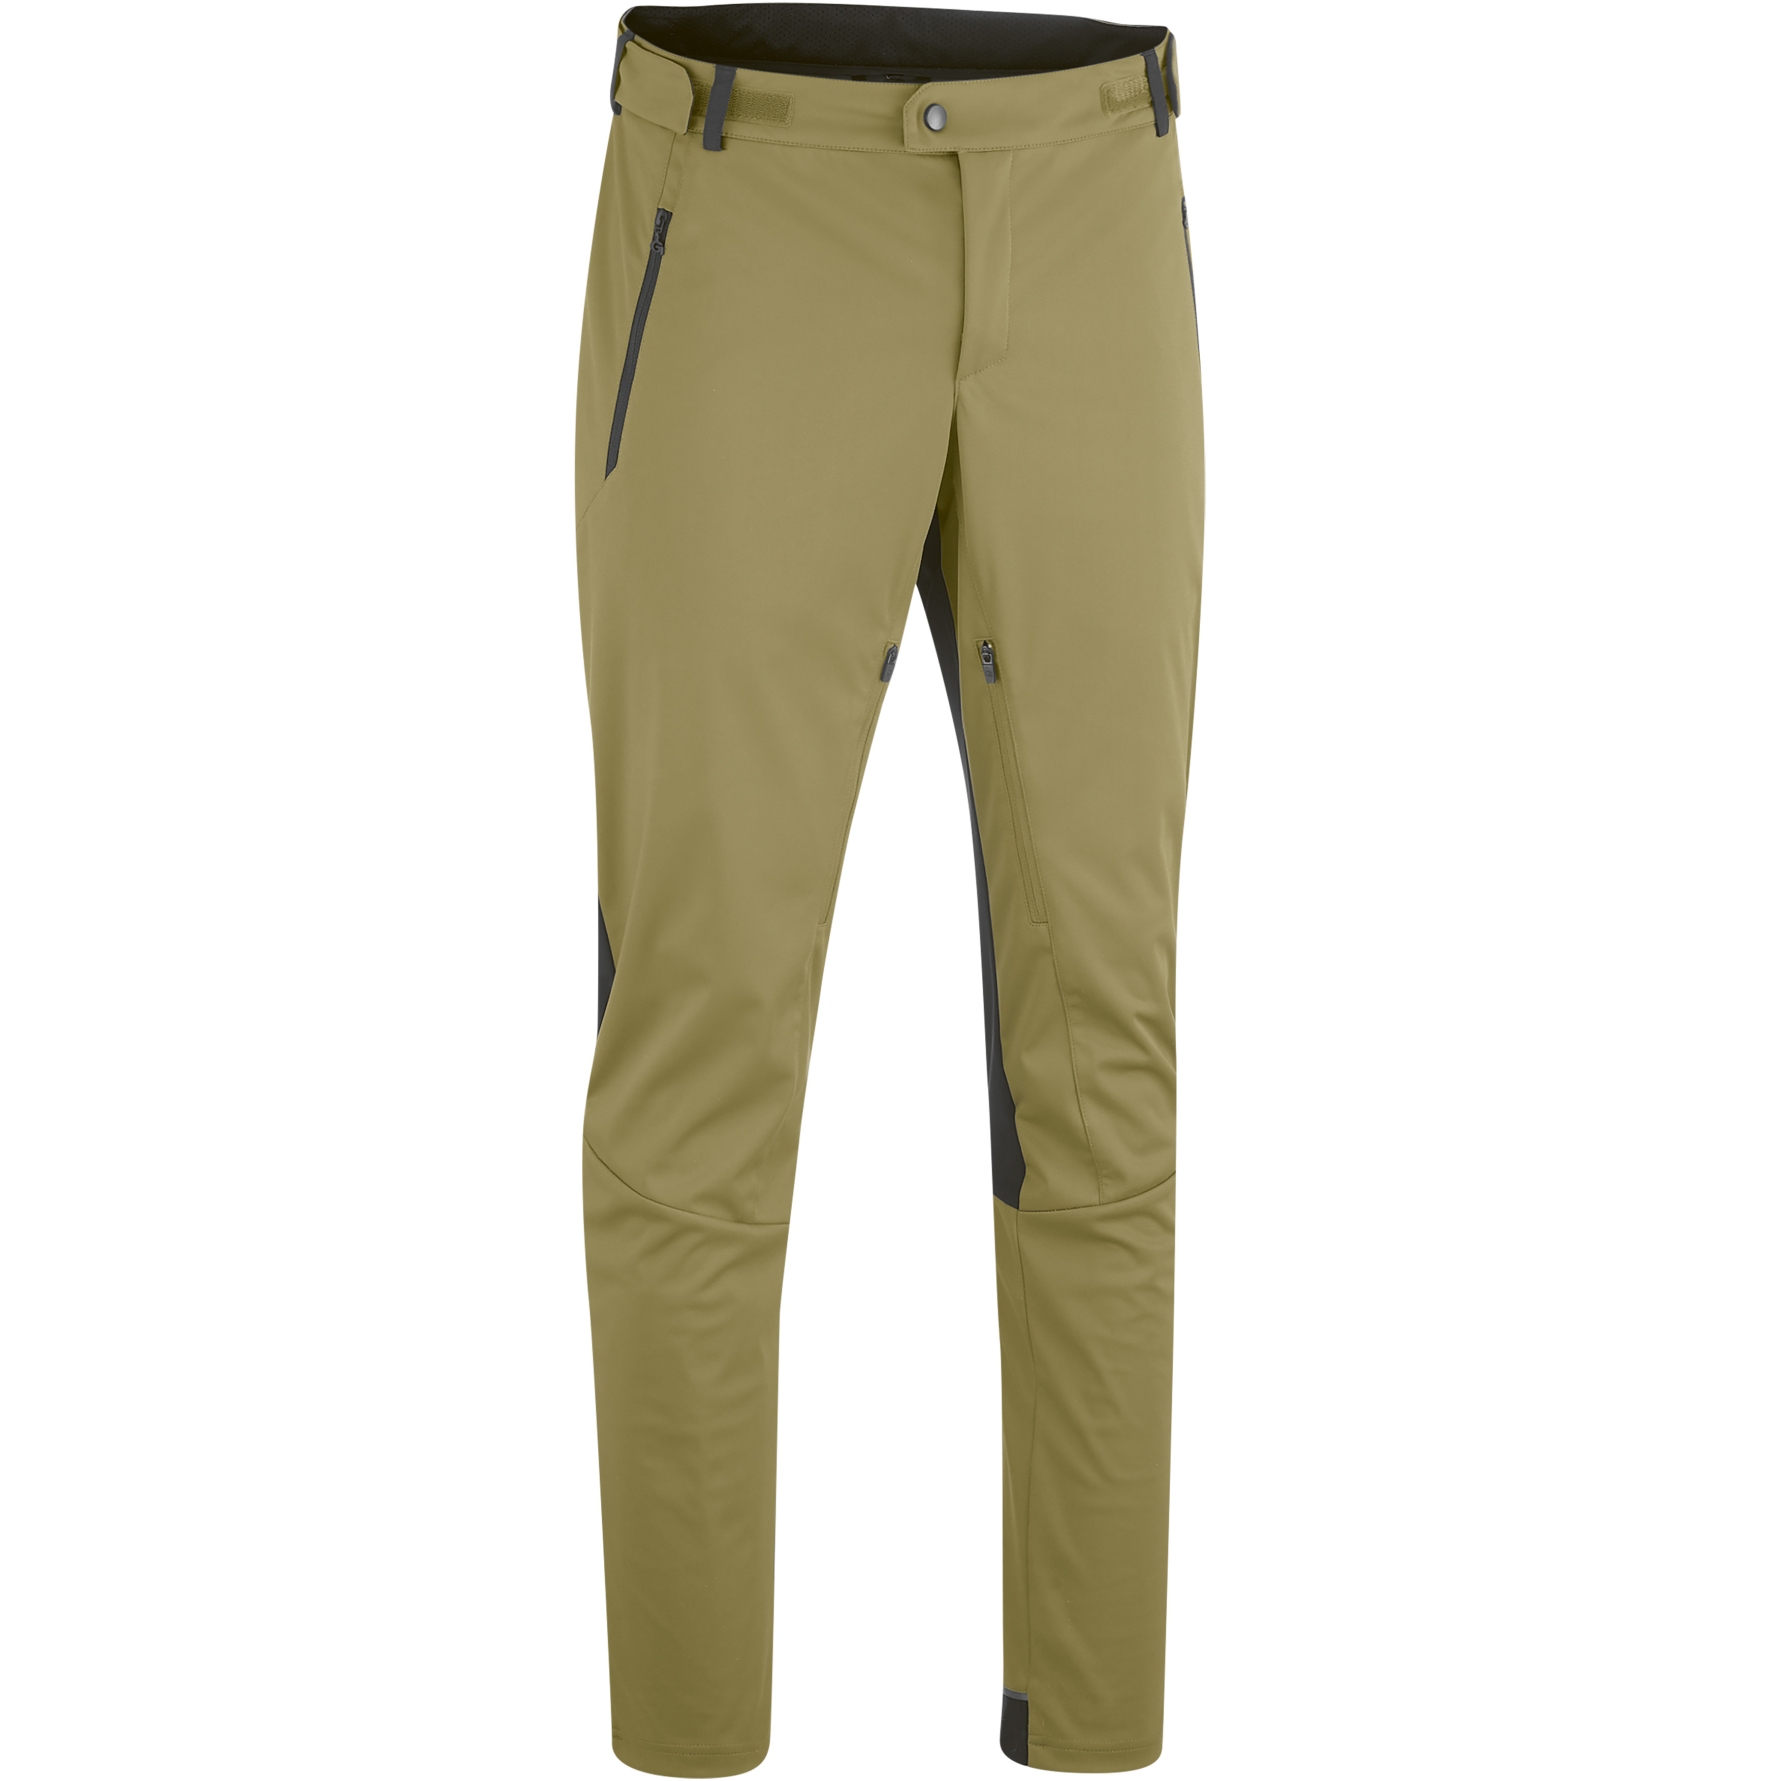 Foto de Gonso Pantalones Softshell Ciclismo Hombre - Skarn Light - Dusty Country Side